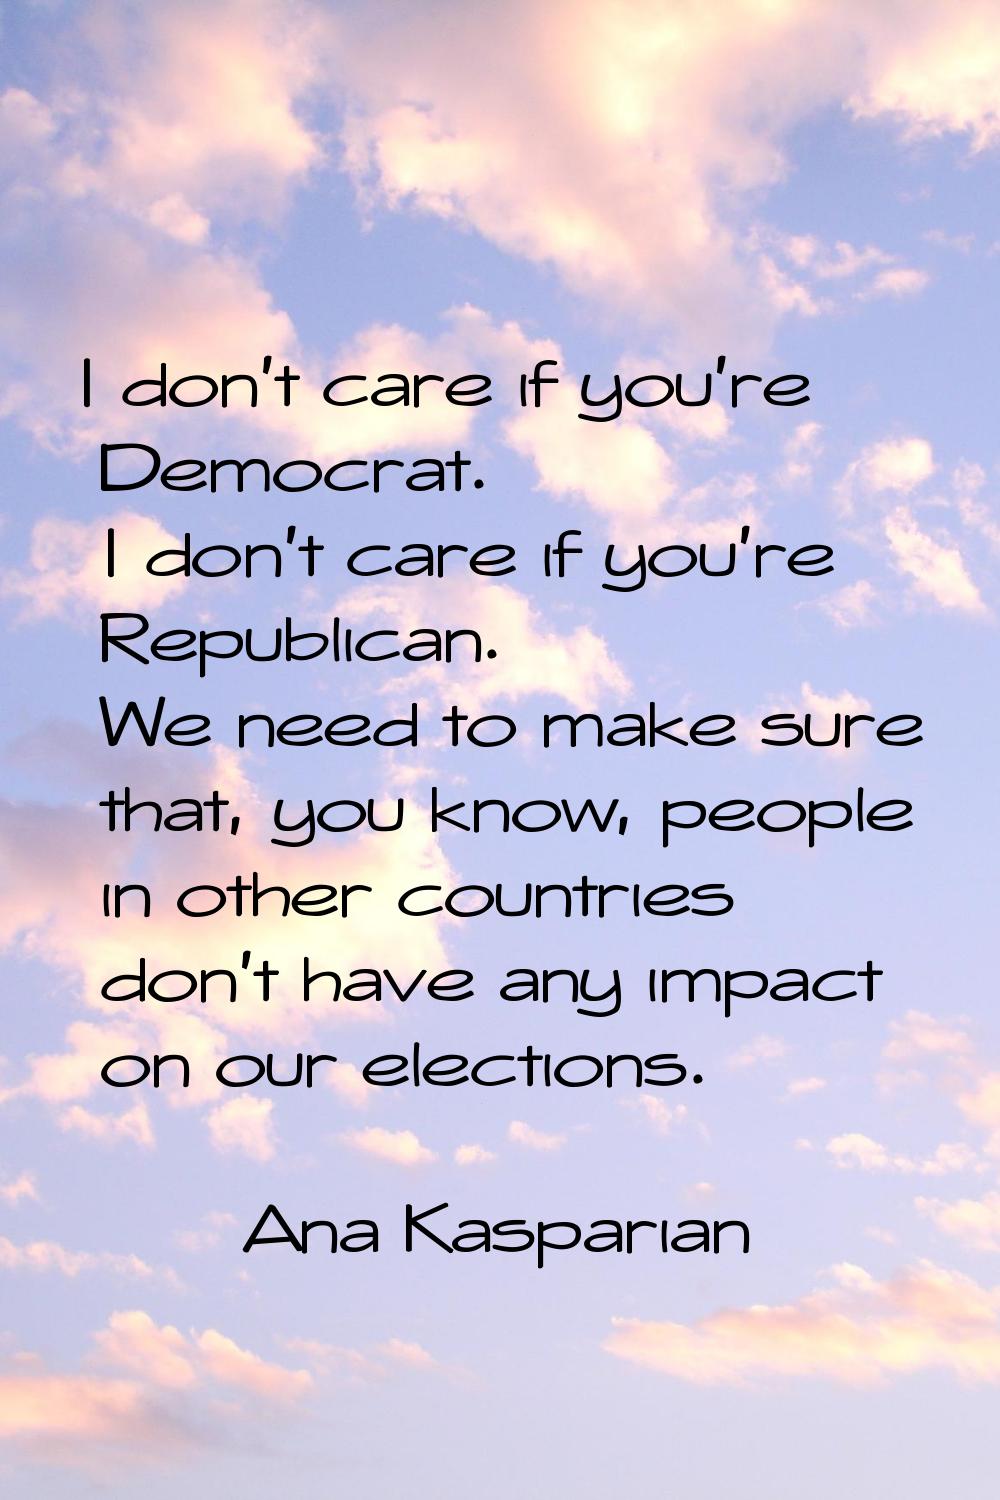 I don't care if you're Democrat. I don't care if you're Republican. We need to make sure that, you 